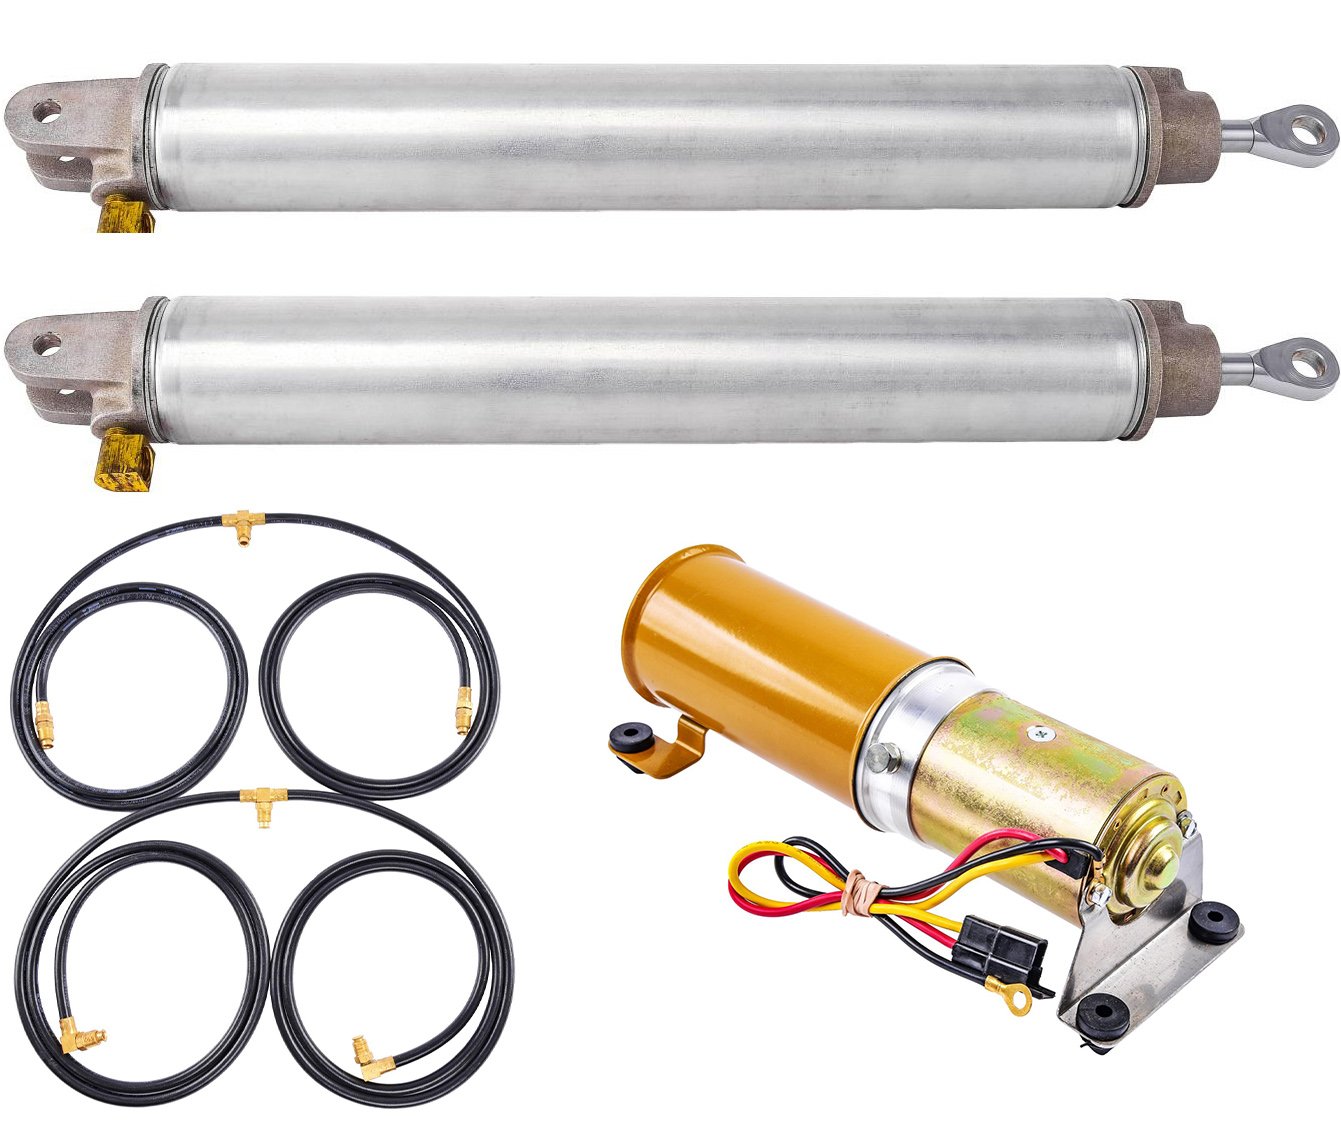 Convertible Top Cylinder, Motor & Hose Kit for 1955-1957 Full-Size Chevrolet, Pontiac Convertibles [Sold as a Kit]